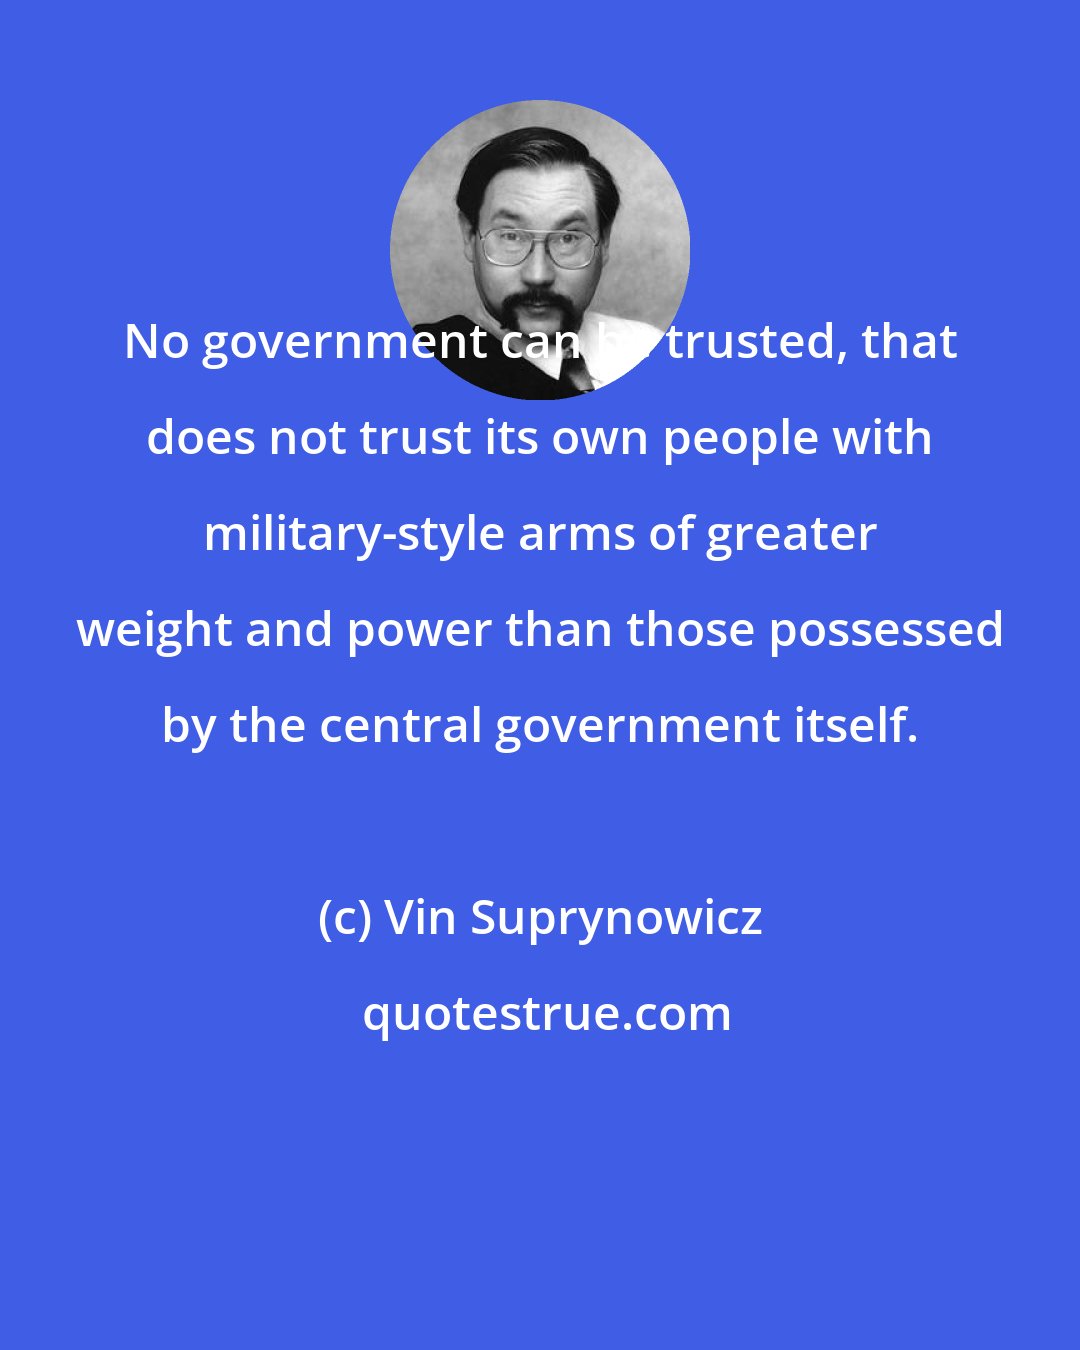 Vin Suprynowicz: No government can be trusted, that does not trust its own people with military-style arms of greater weight and power than those possessed by the central government itself.